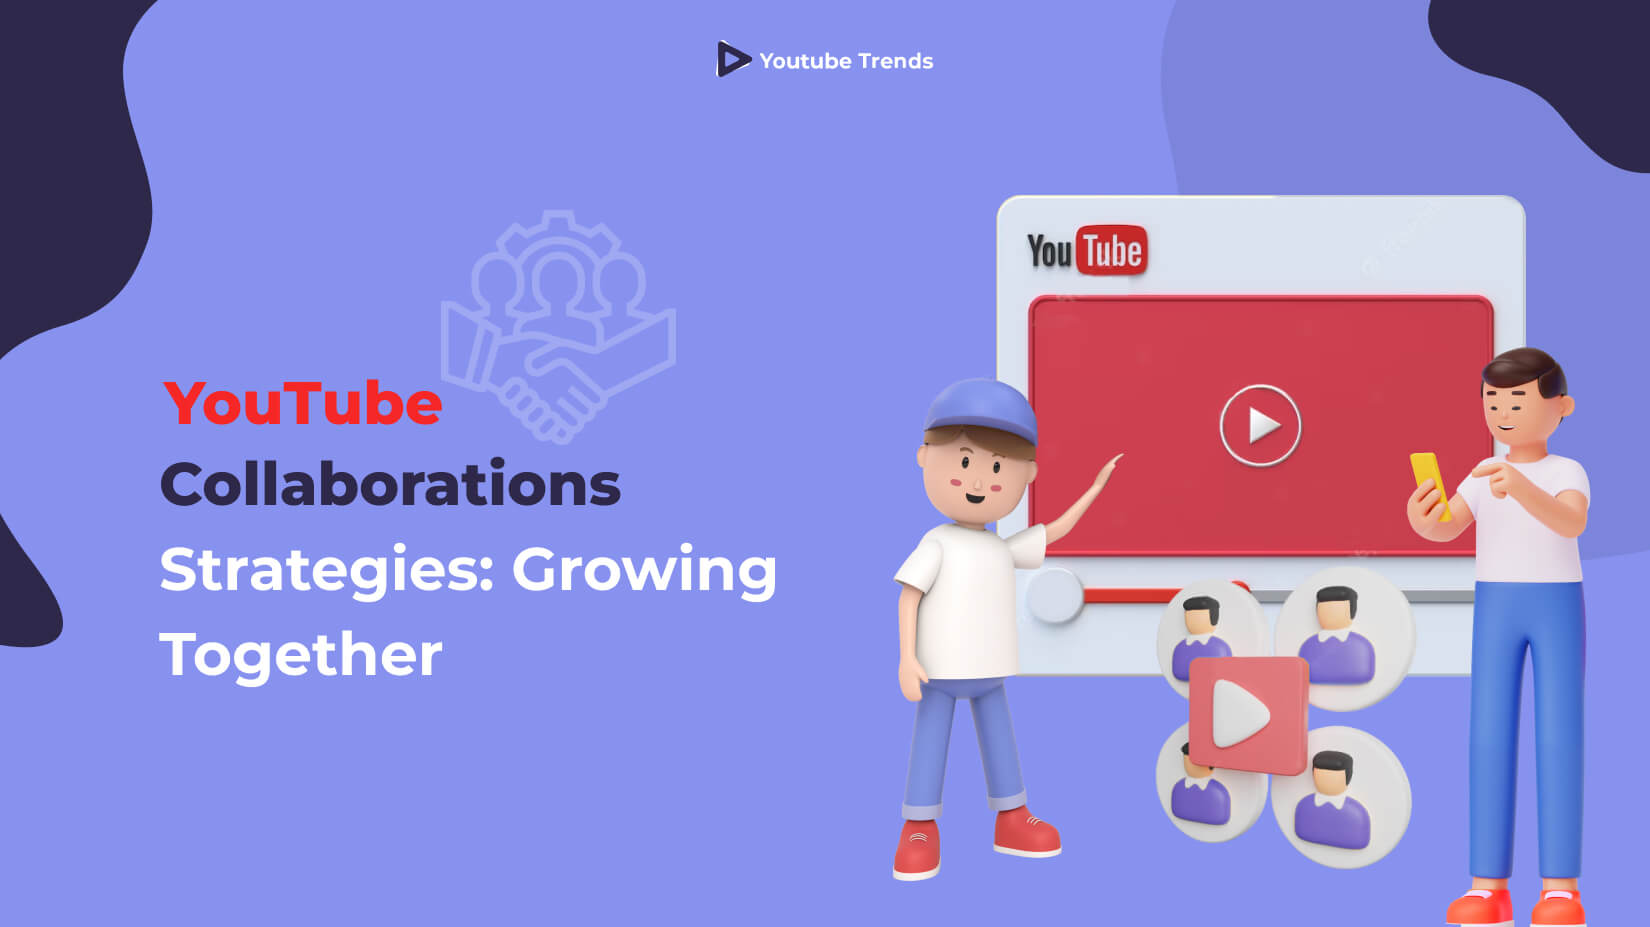 YouTube Collaborations Strategies: Growing Together